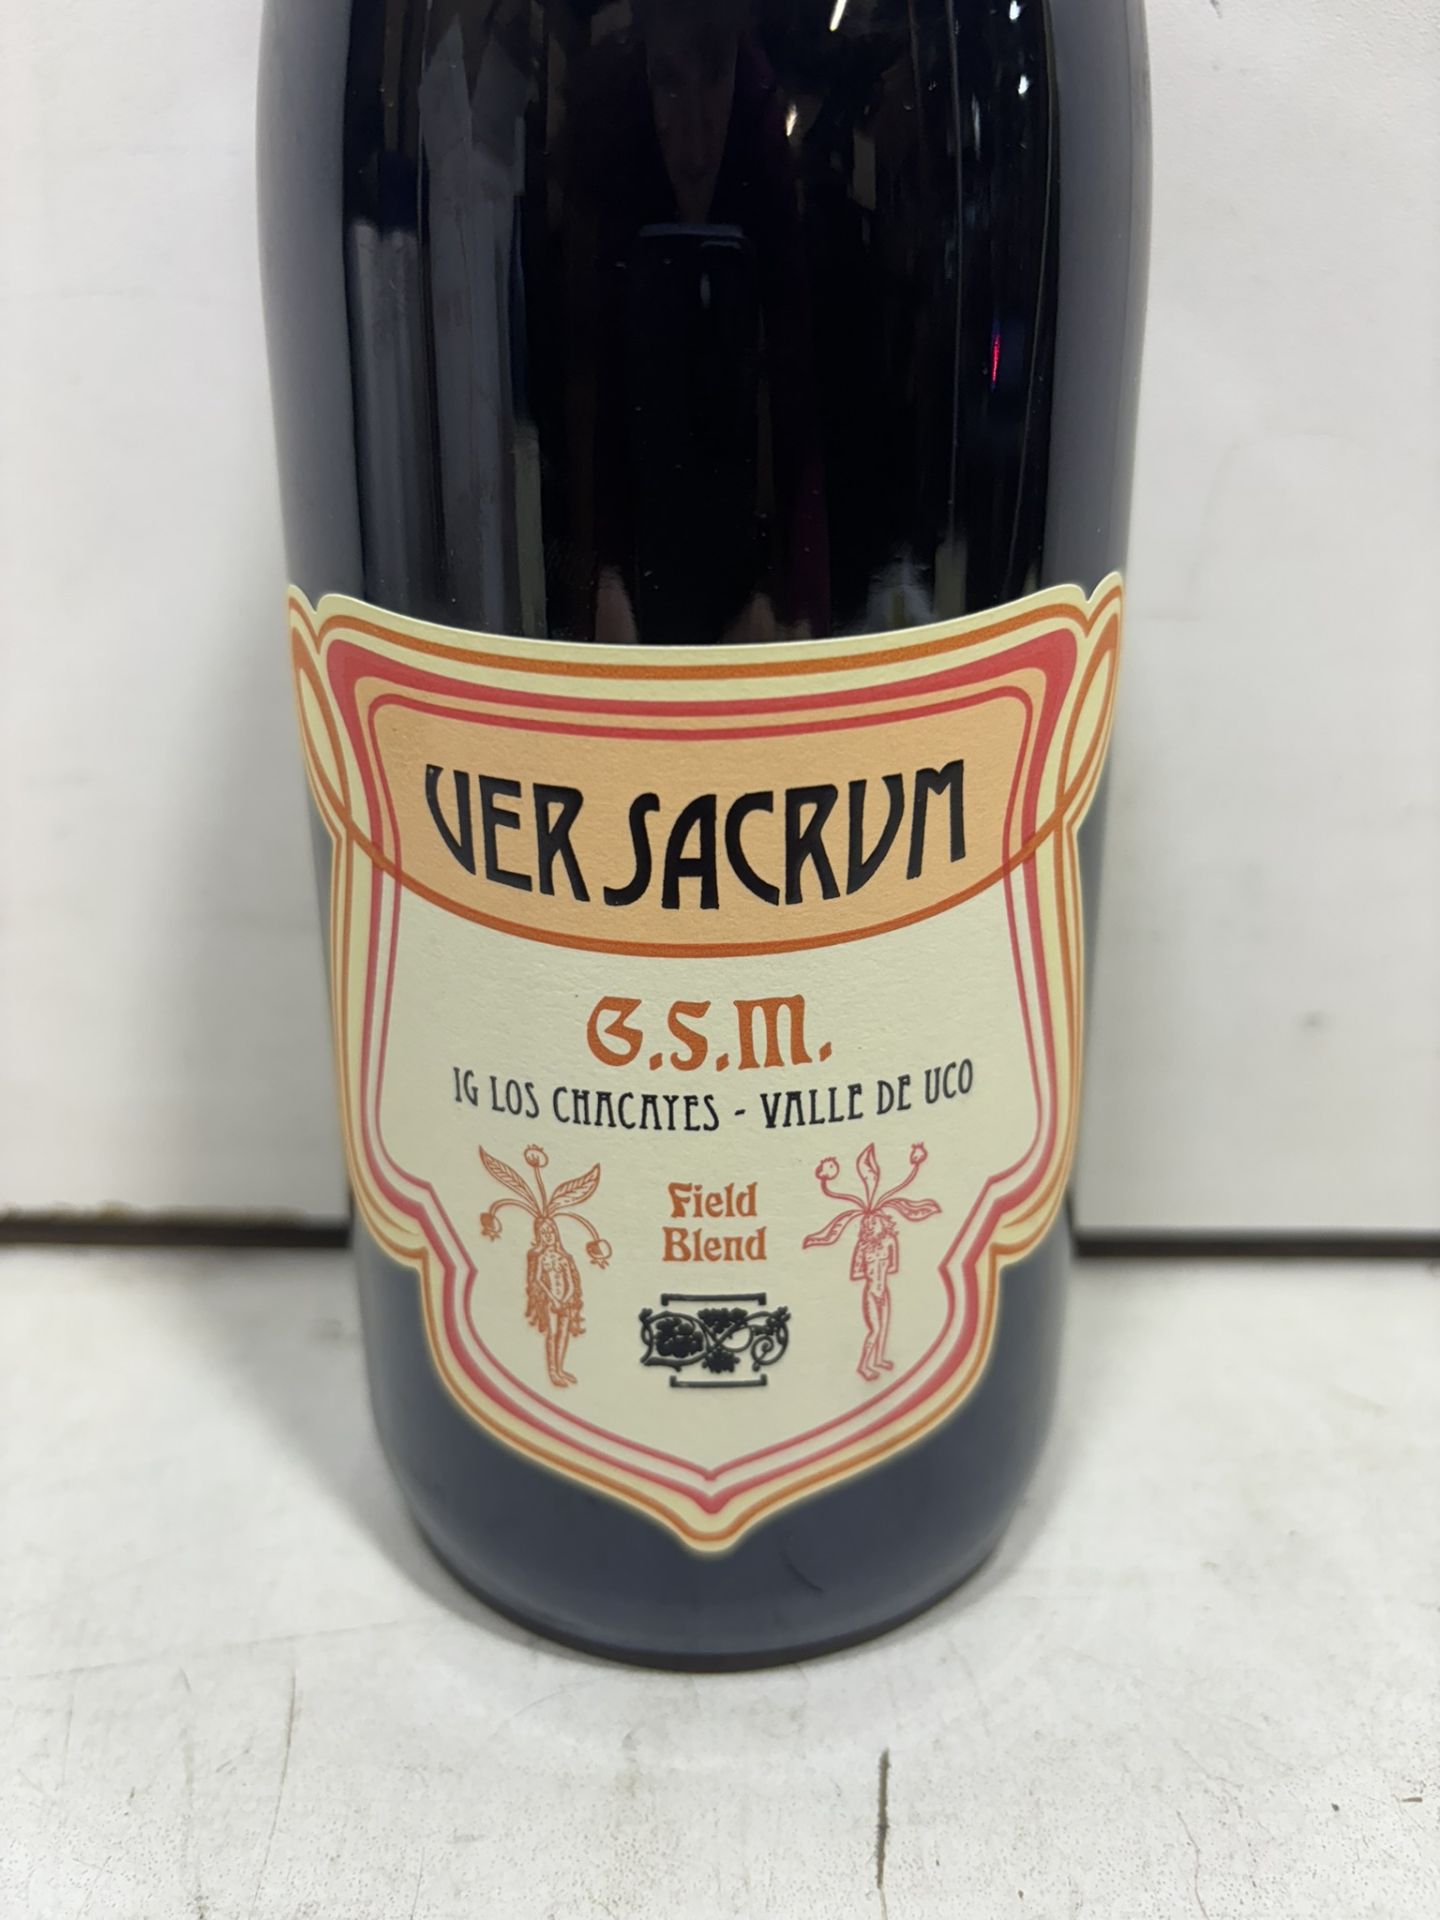 8 X Bottles Of Ver Sacrum G.S.M Field Blend 2018 Los Chacayes, Mendoza, Red Wine - Image 2 of 4